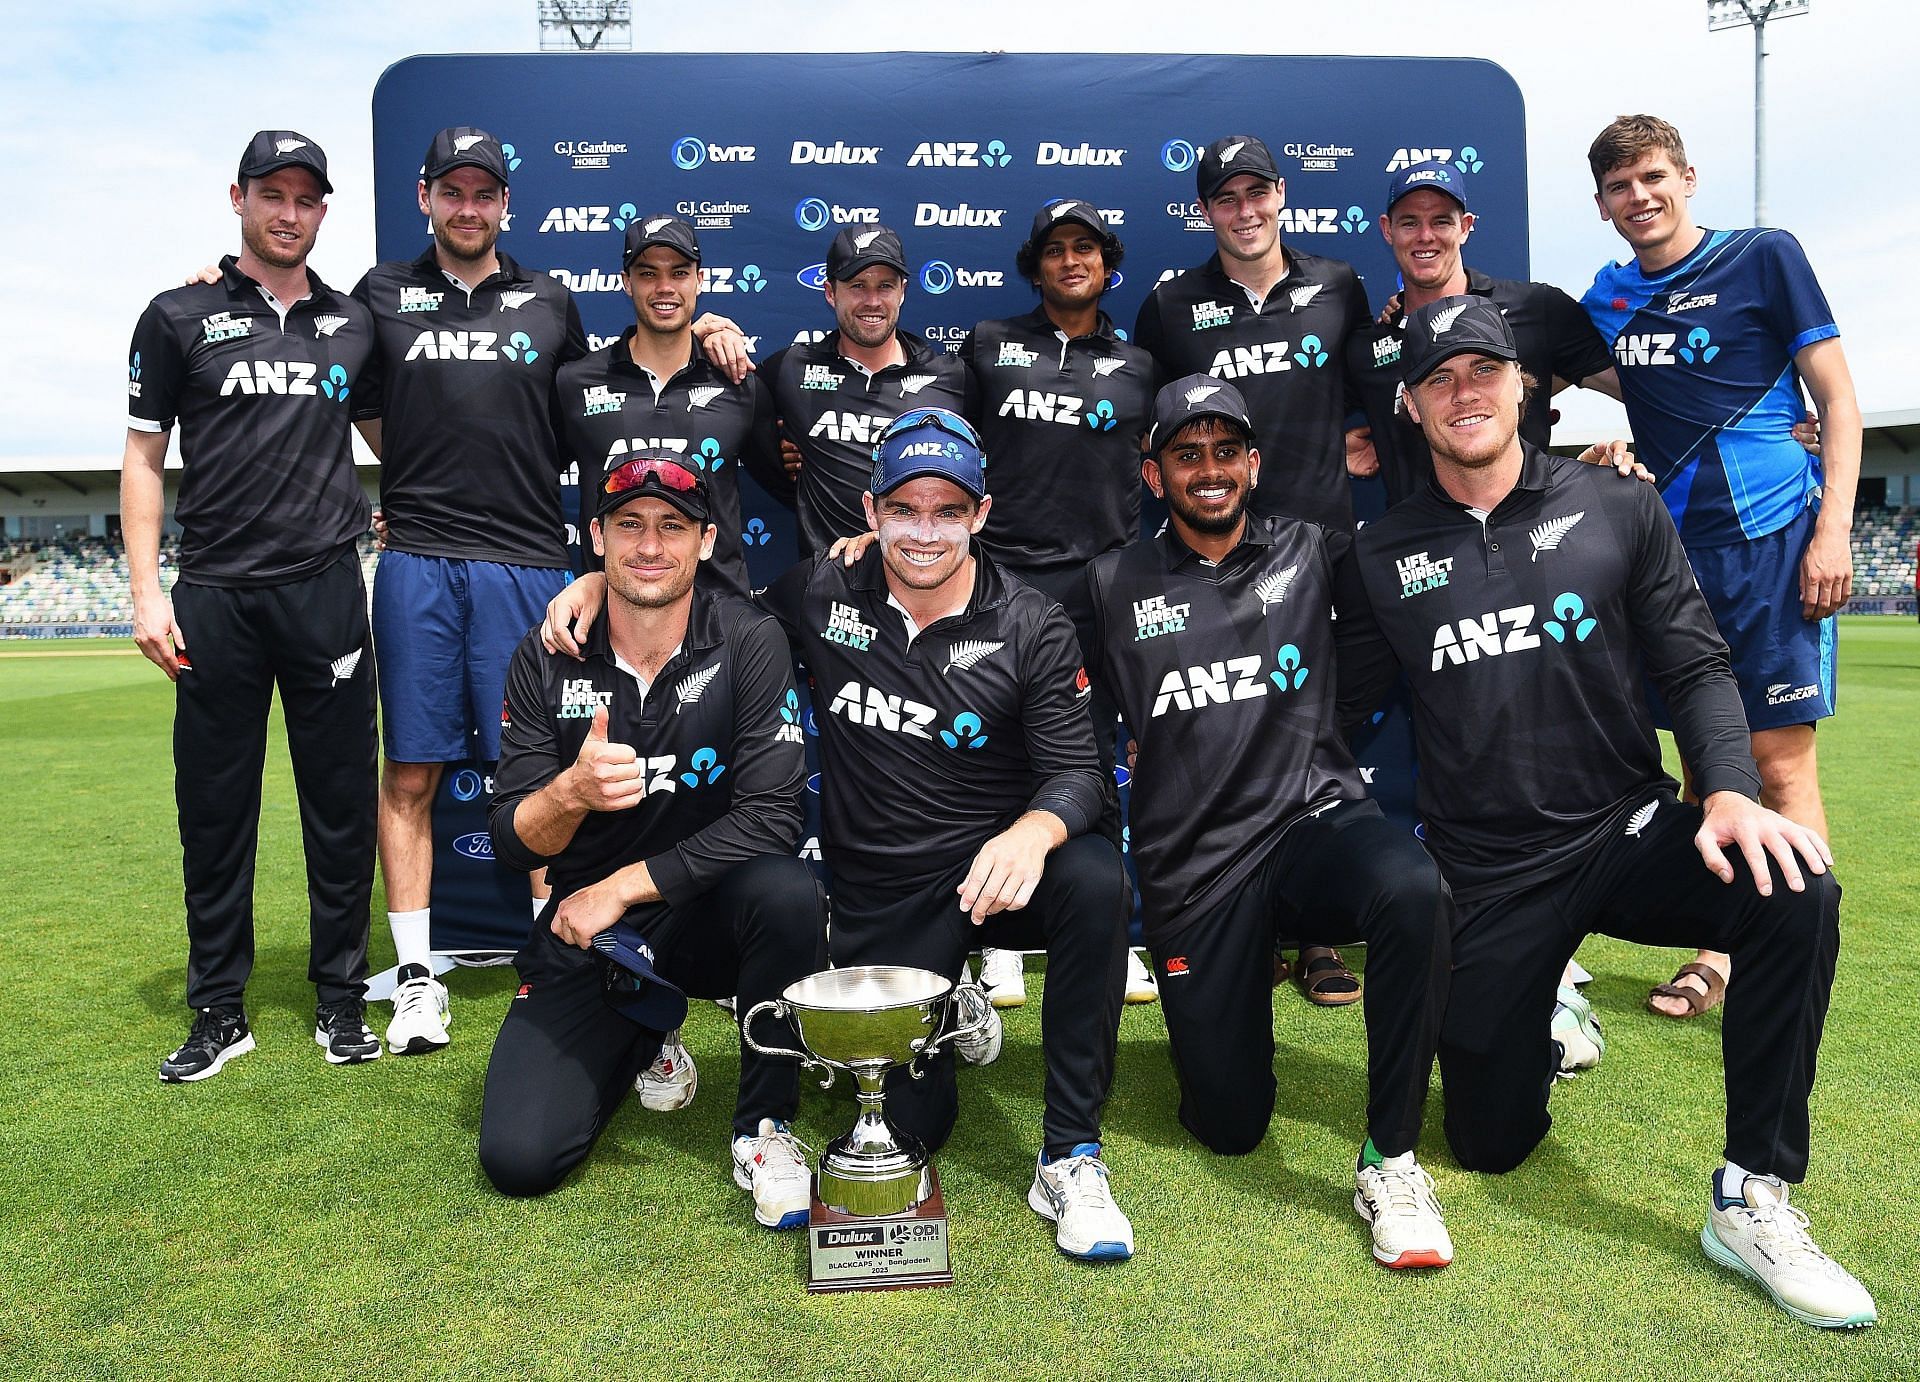 The Kiwis celebrating with the trophy after clinching the ODI series 2-1 against Bangladesh